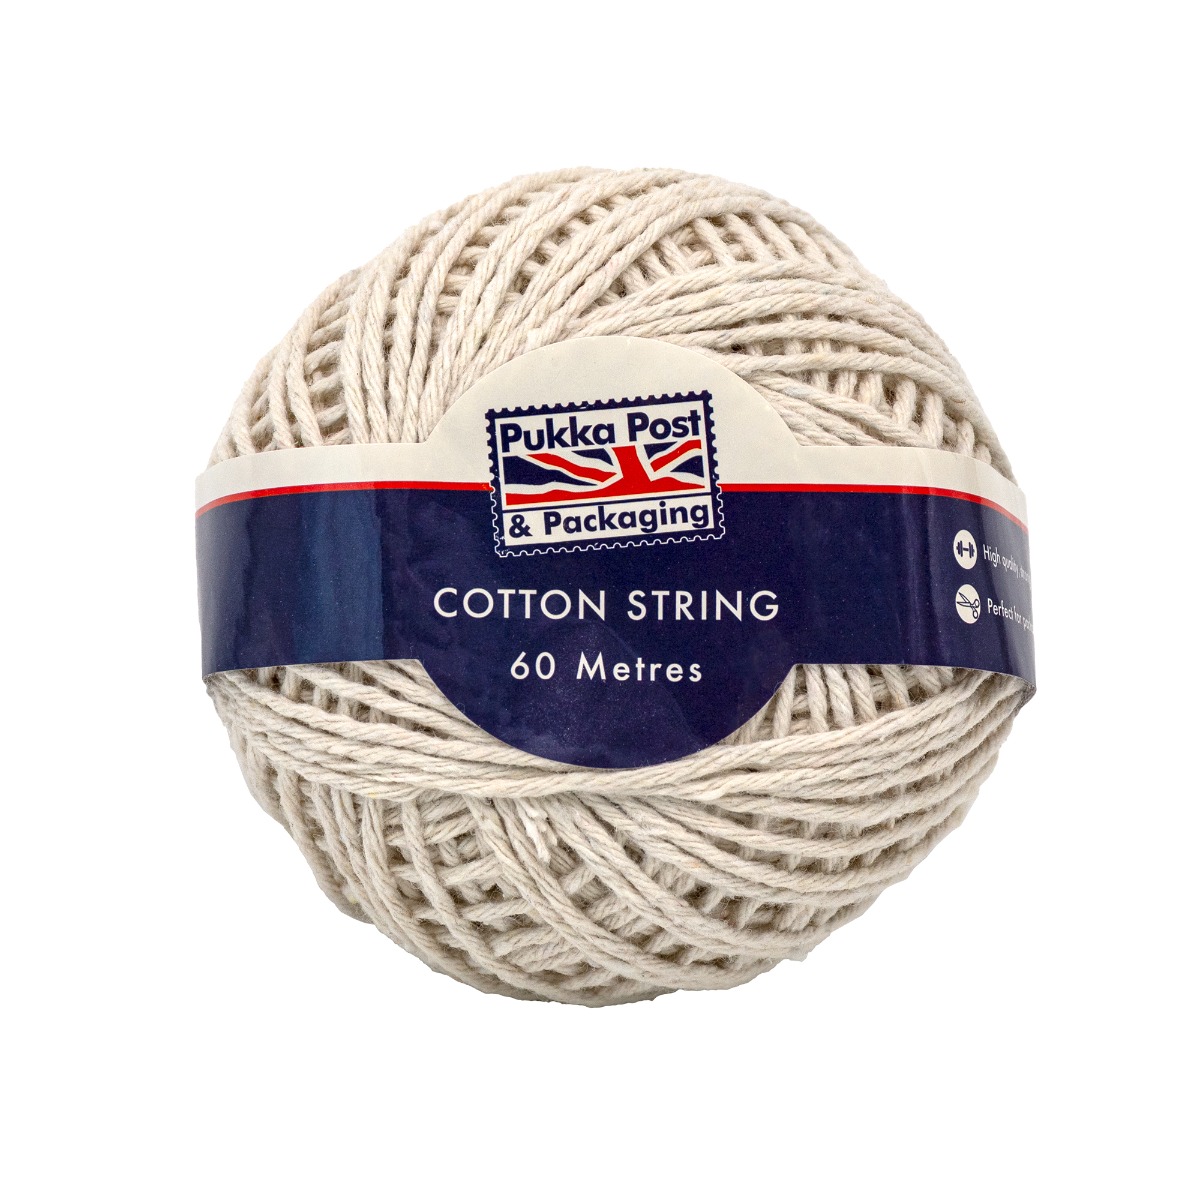 100% cotton String Ball in 60m length - Pack of 4 - Pukka Post & Packaging